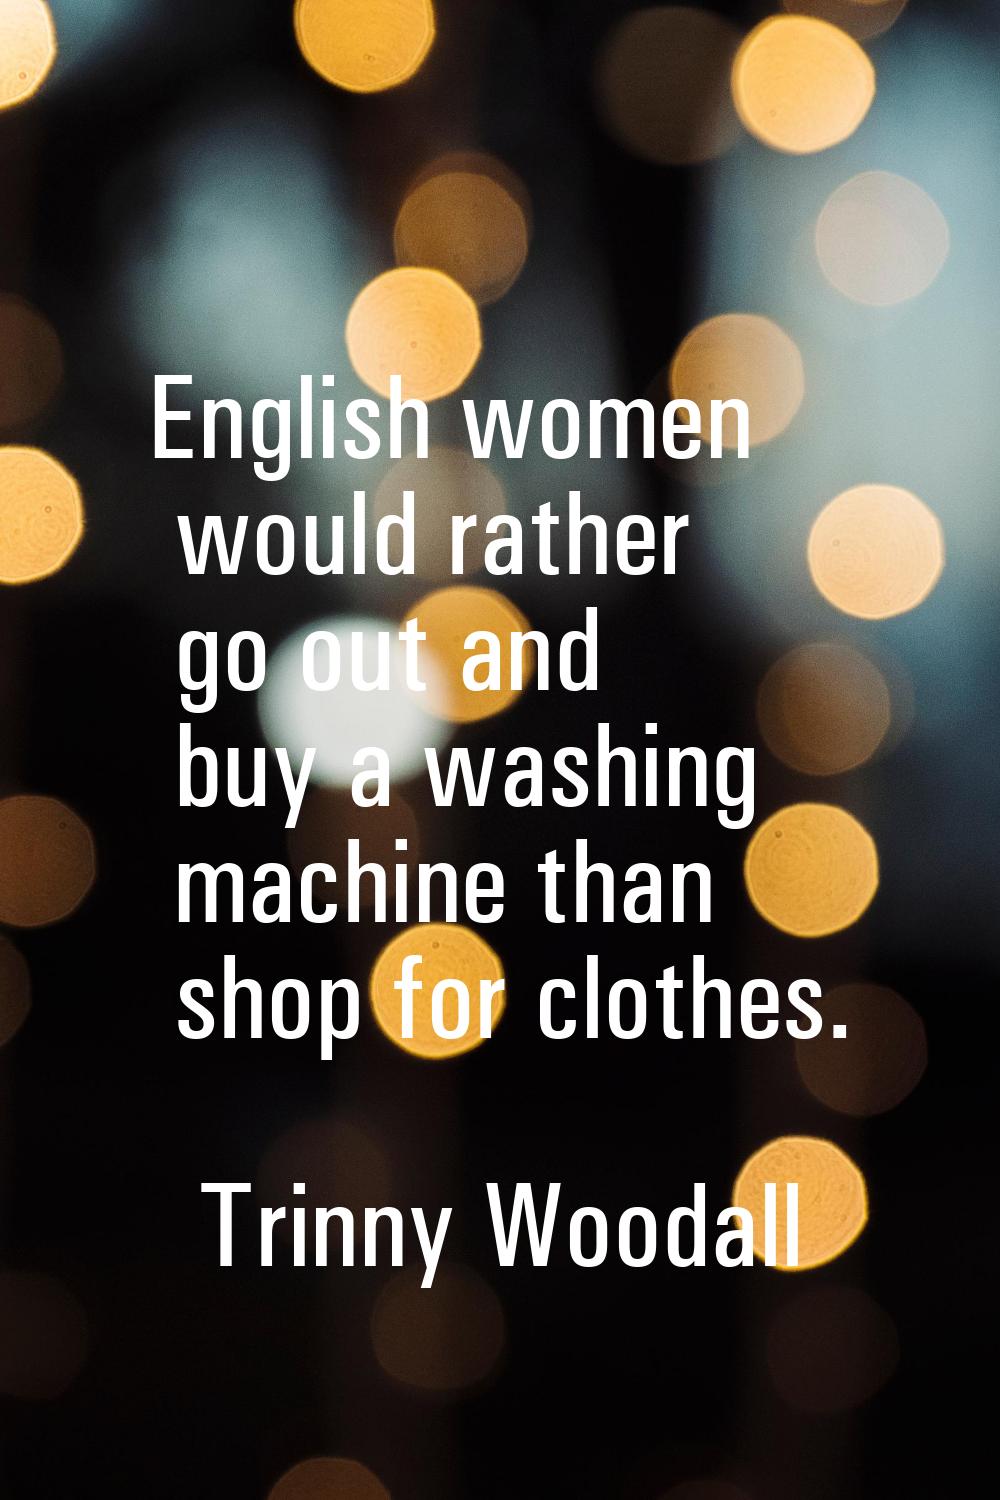 English women would rather go out and buy a washing machine than shop for clothes.